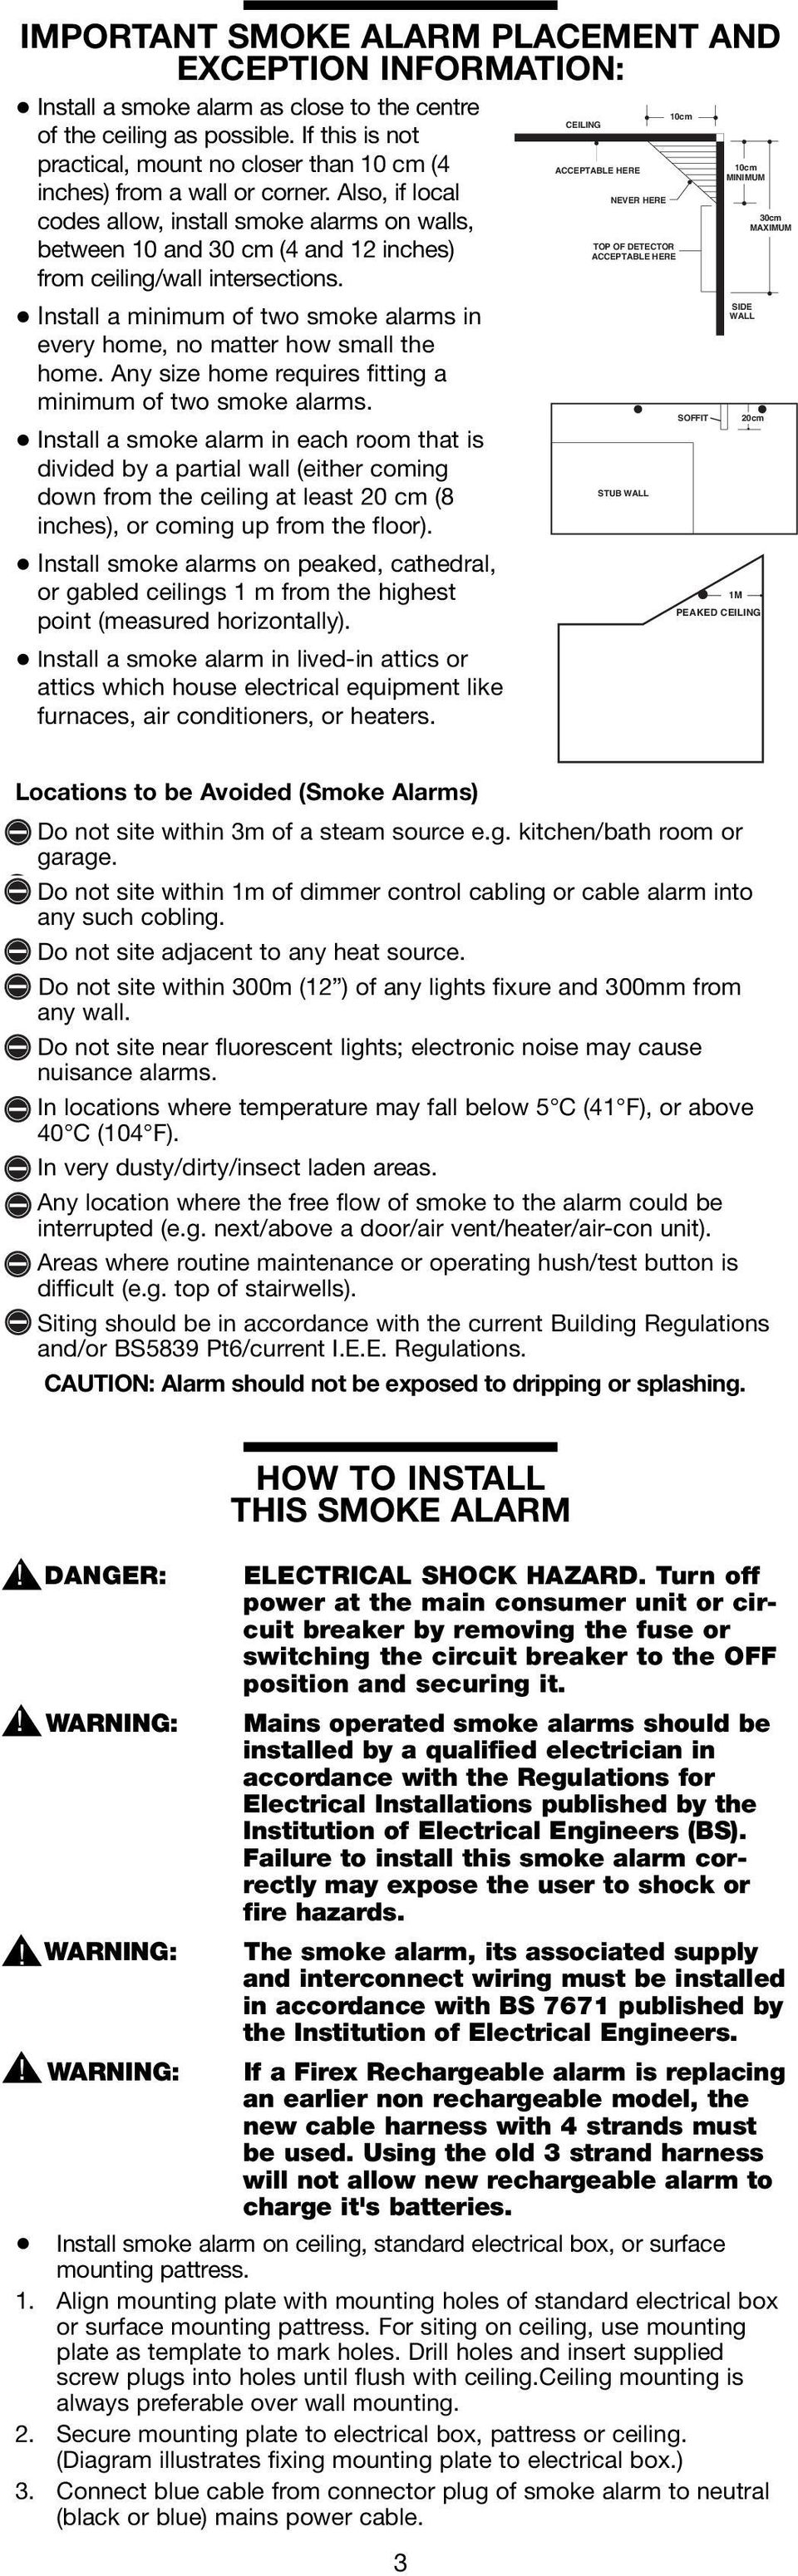 Also, if local NEVER HERE 30cm codes allow, install smoke alarms on walls, MAXIMUM TOP OF DETECTOR between 10 and 30 cm (4 and 12 inches) ACCEPTABLE HERE from ceiling/wall intersections.